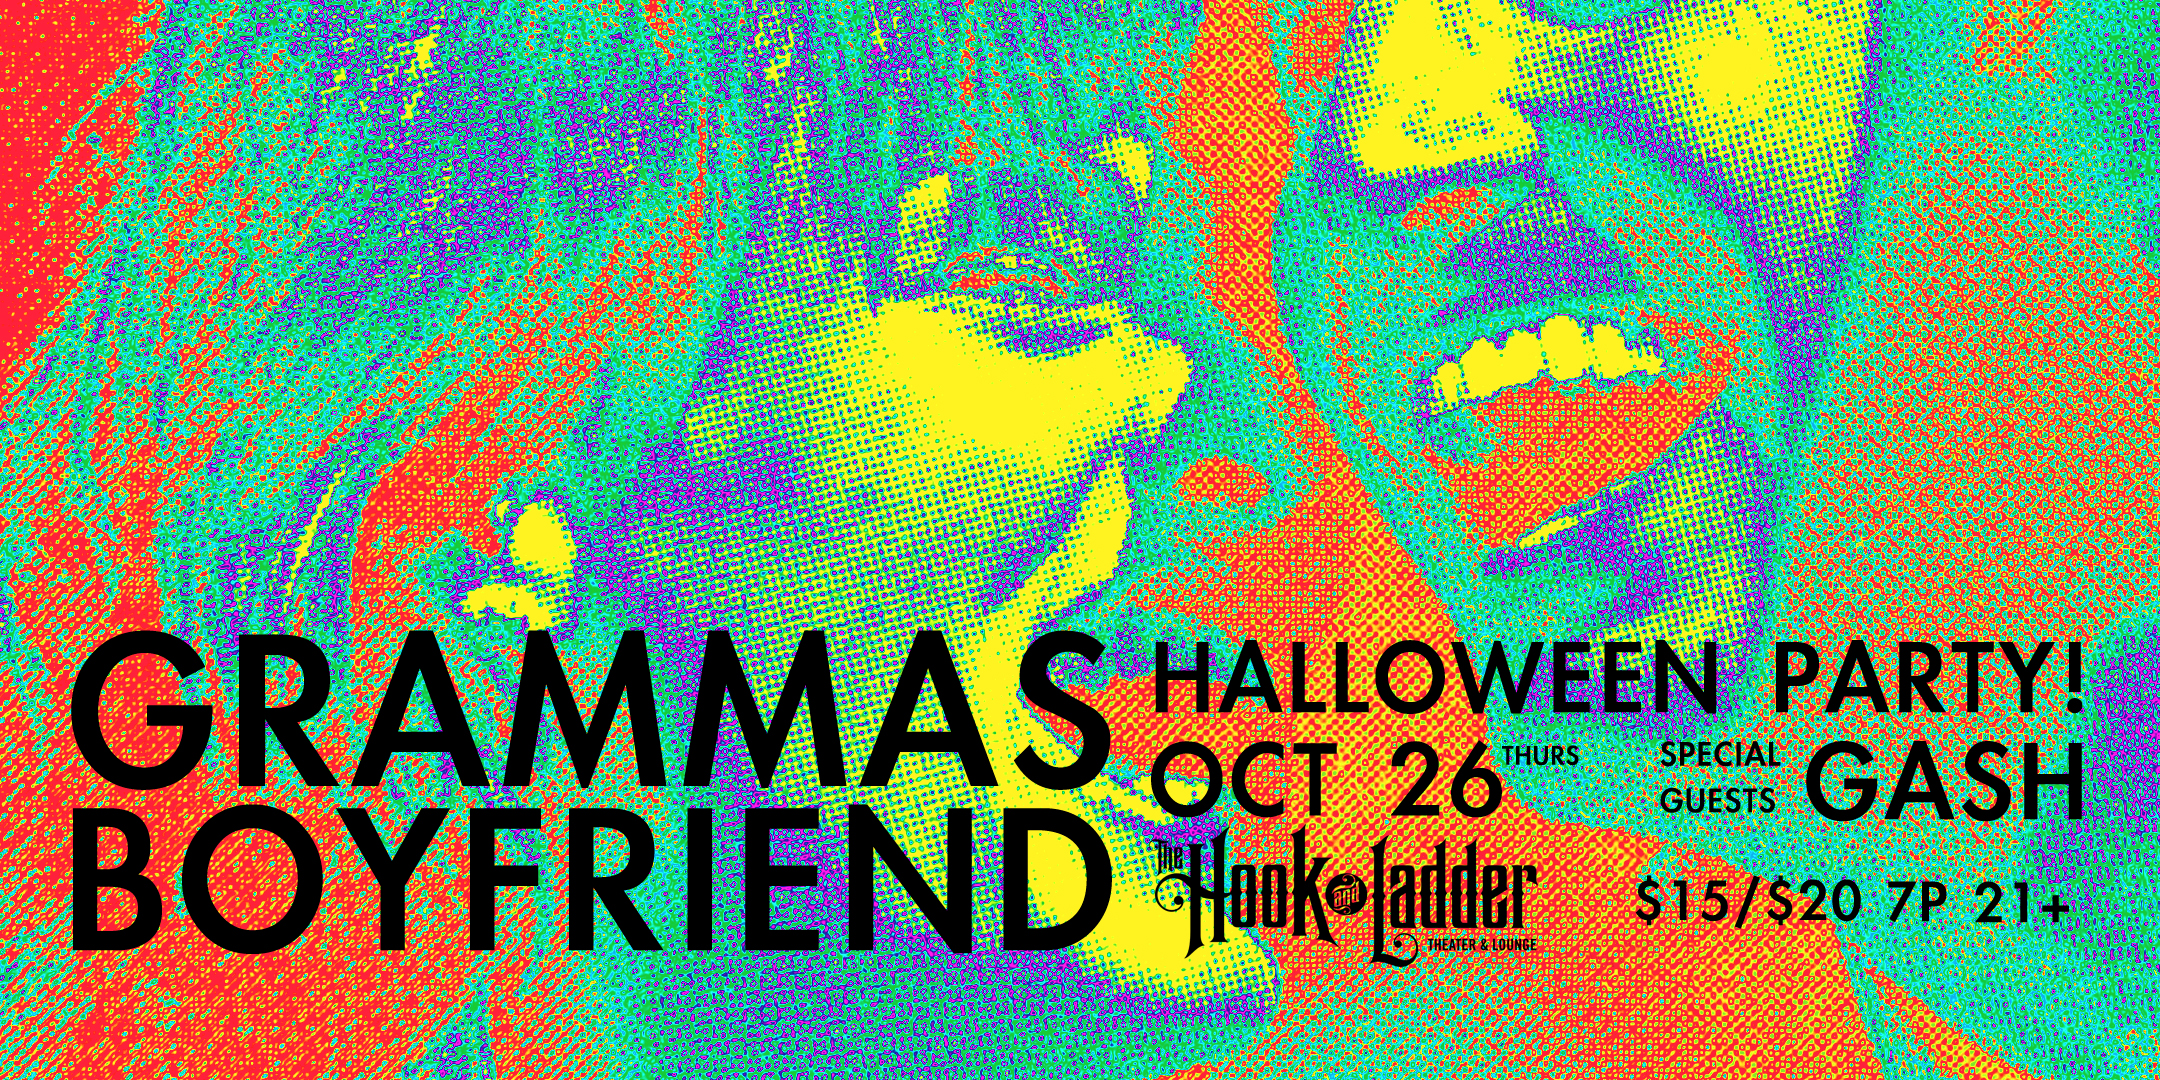 Gramma's Boyfriend Halloween Party with Gash Thursday, October 26 The Hook and Ladder Theater Doors 7:00pm :: Music 7:30pm :: 21+ General Admission: $15 ADV / $20 DOS